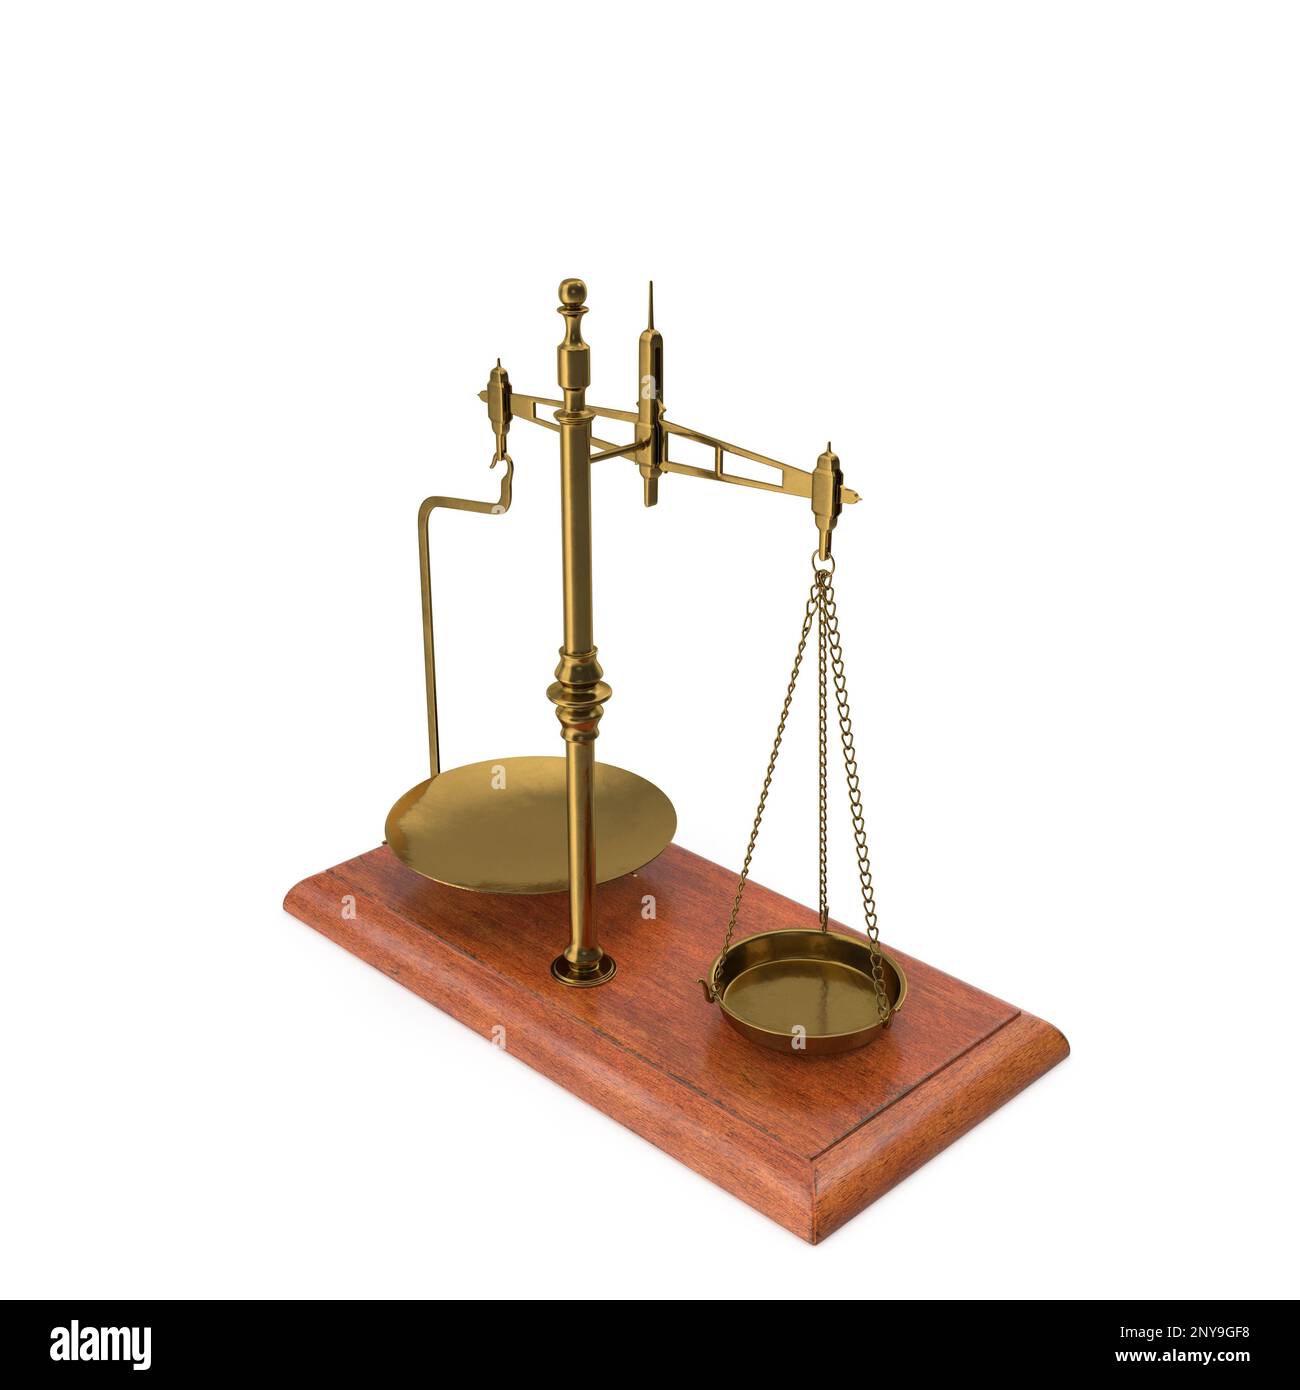 https://c8.alamy.com/comp/2NY9GF8/gold-brass-antique-balance-scale-isolated-on-white-background-3d-render-illustration-2NY9GF8.jpg